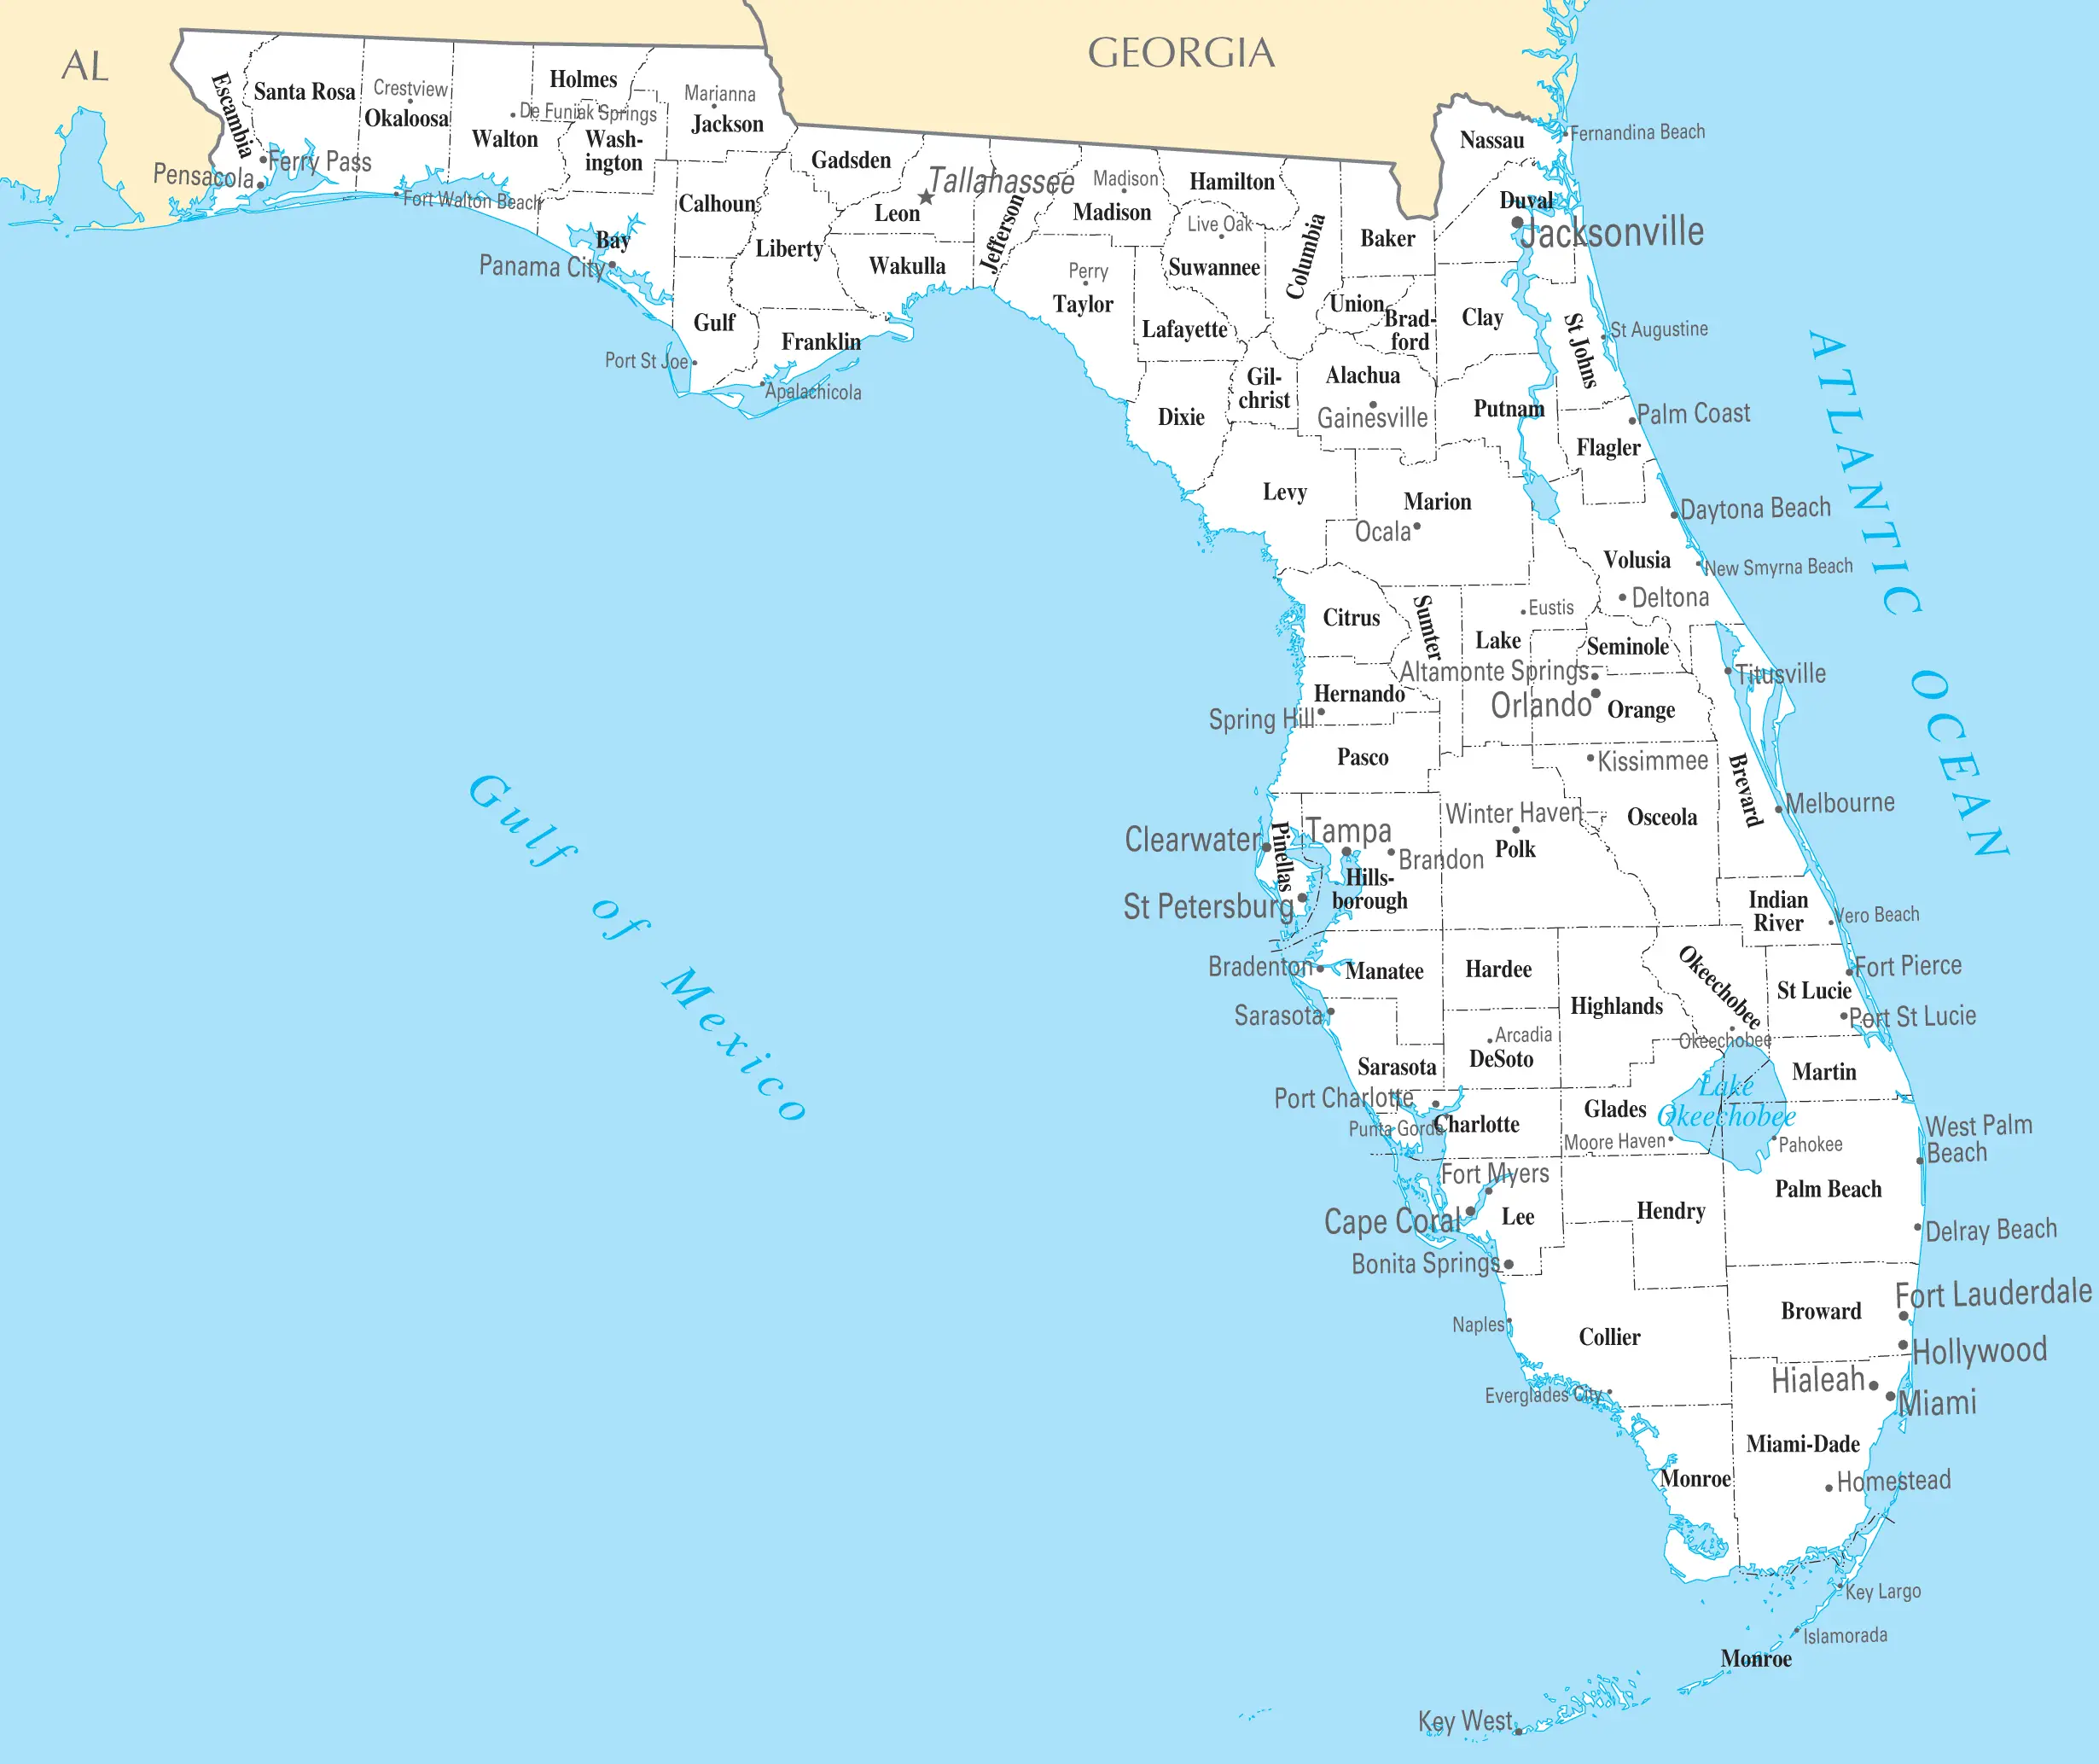 Florida Cities And Towns • Mapsof.net